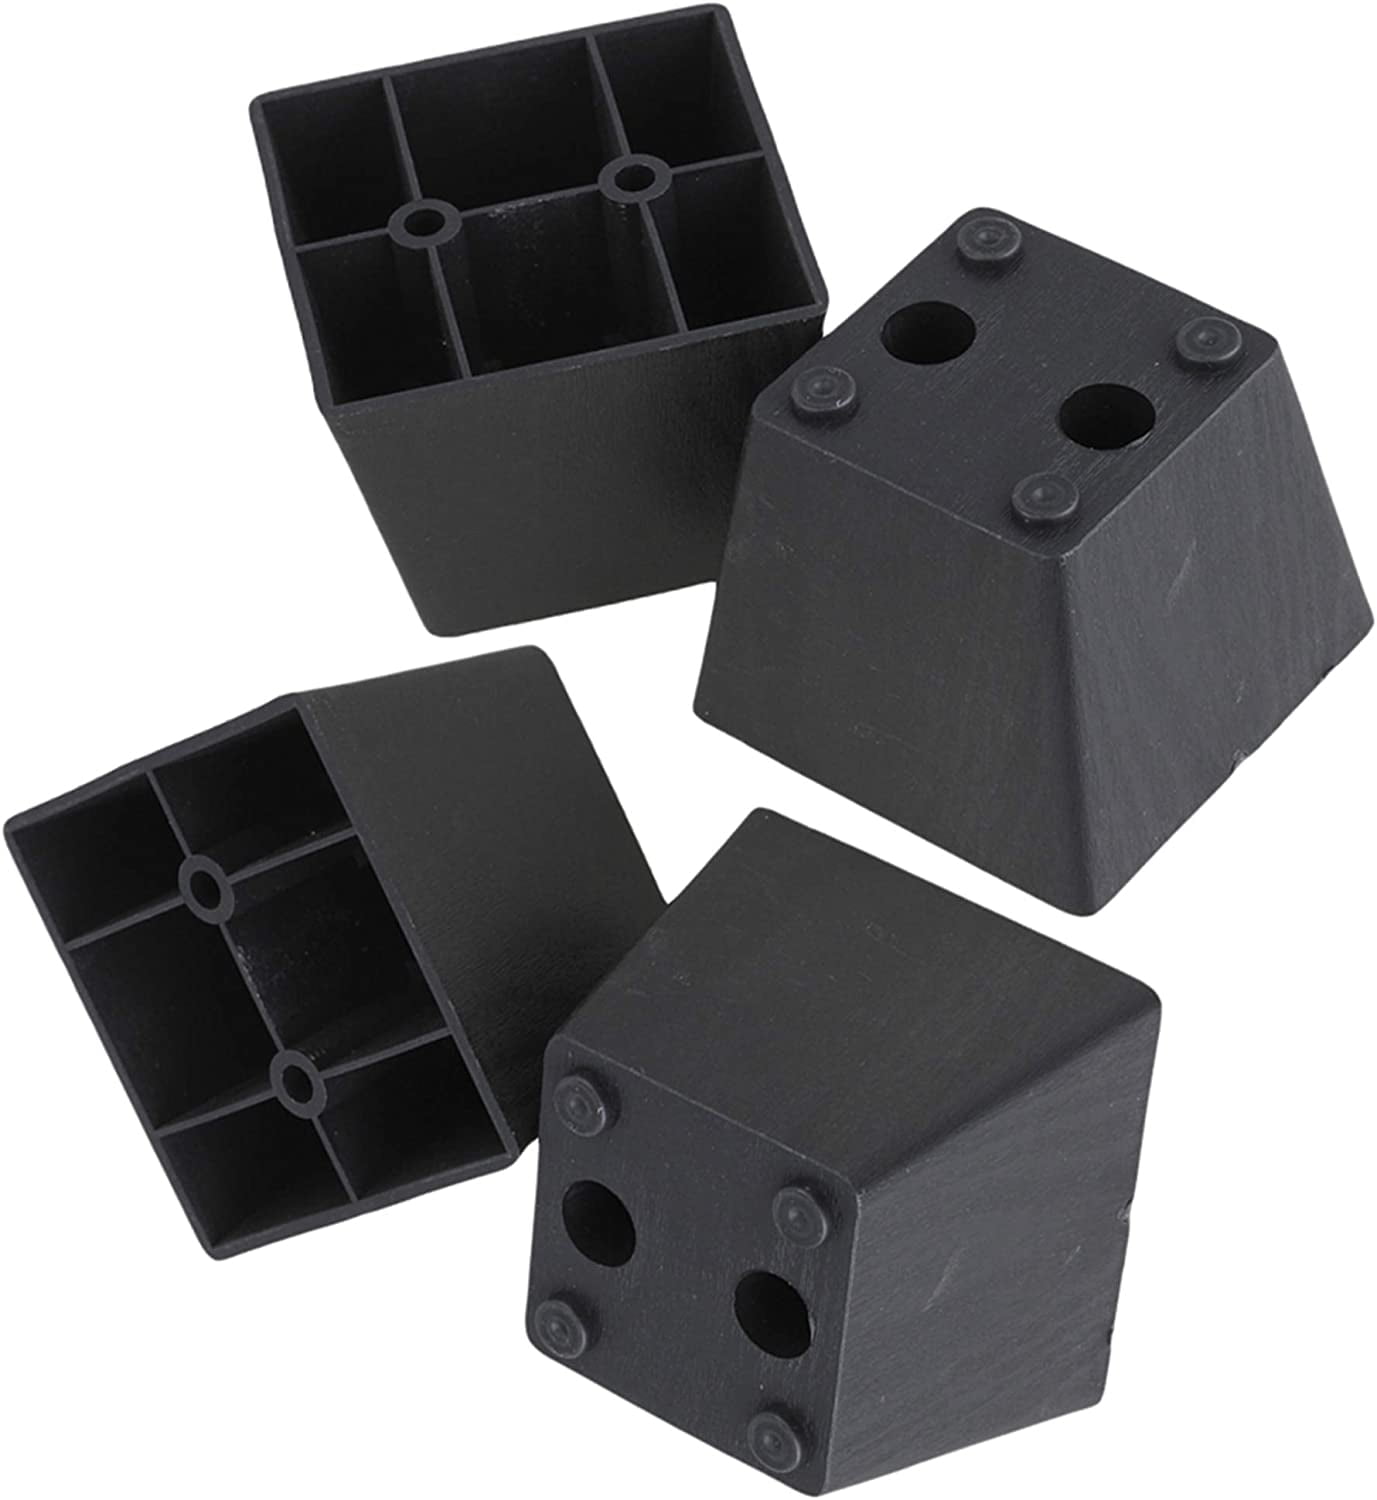 4PCS Plastic Trapezoid Furniture Legs Black for Sofa Cabinets Protection DIY 